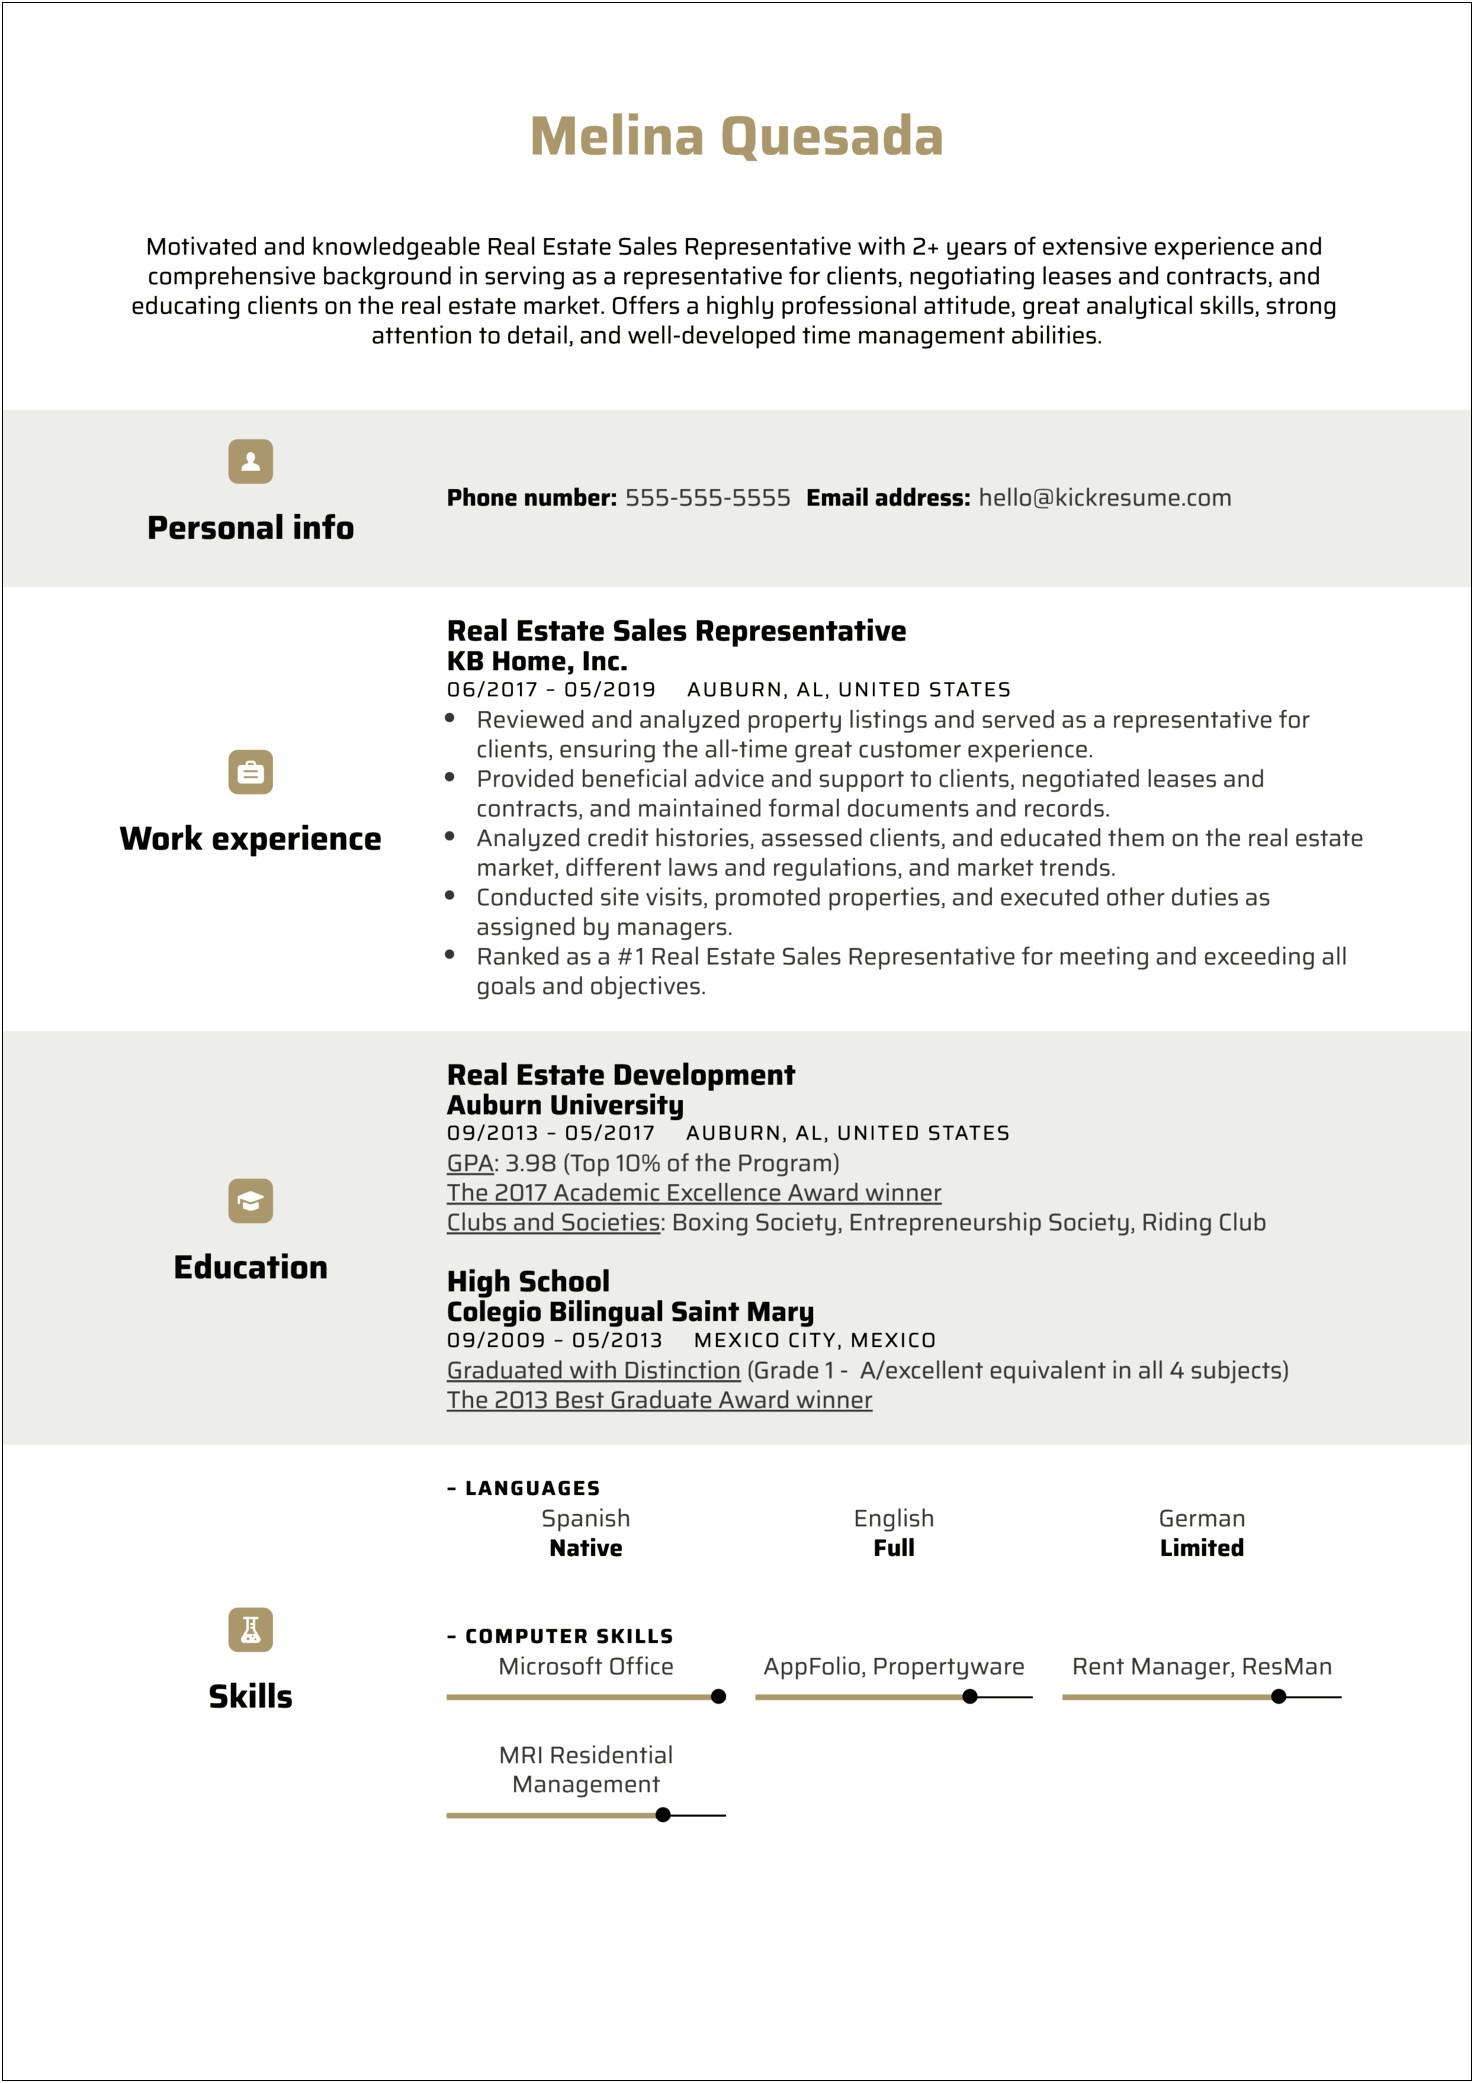 Resume Format For Real Estate Sales Manager India